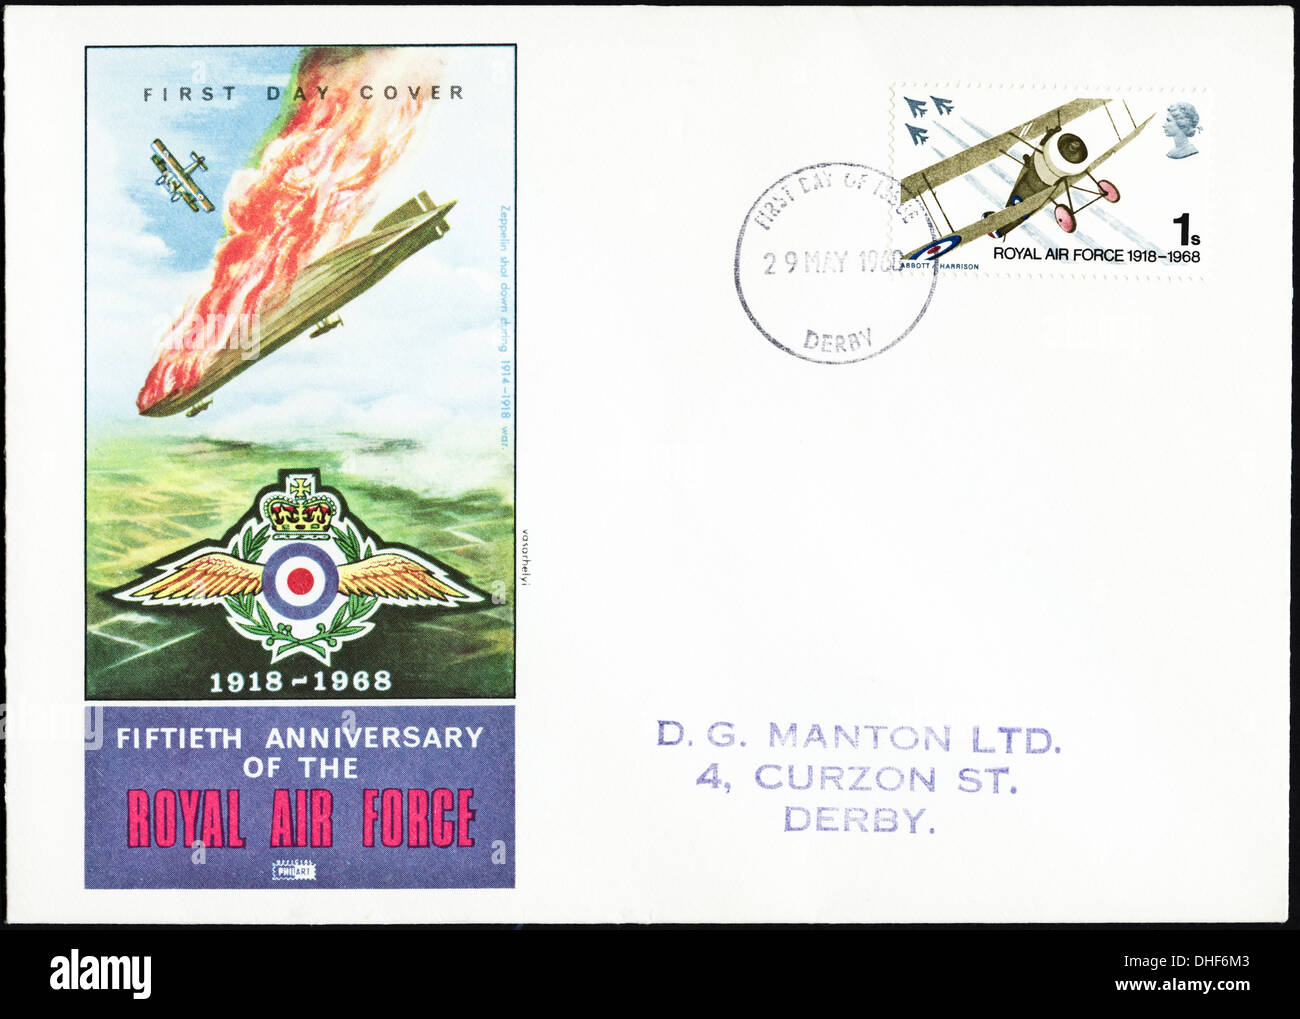 Commemorative 1s postage stamp first day cover for Fiftieth Anniversary of the Royal Air Force 1918 - 1968 postmarked Derby 29th May 1968 Stock Photo